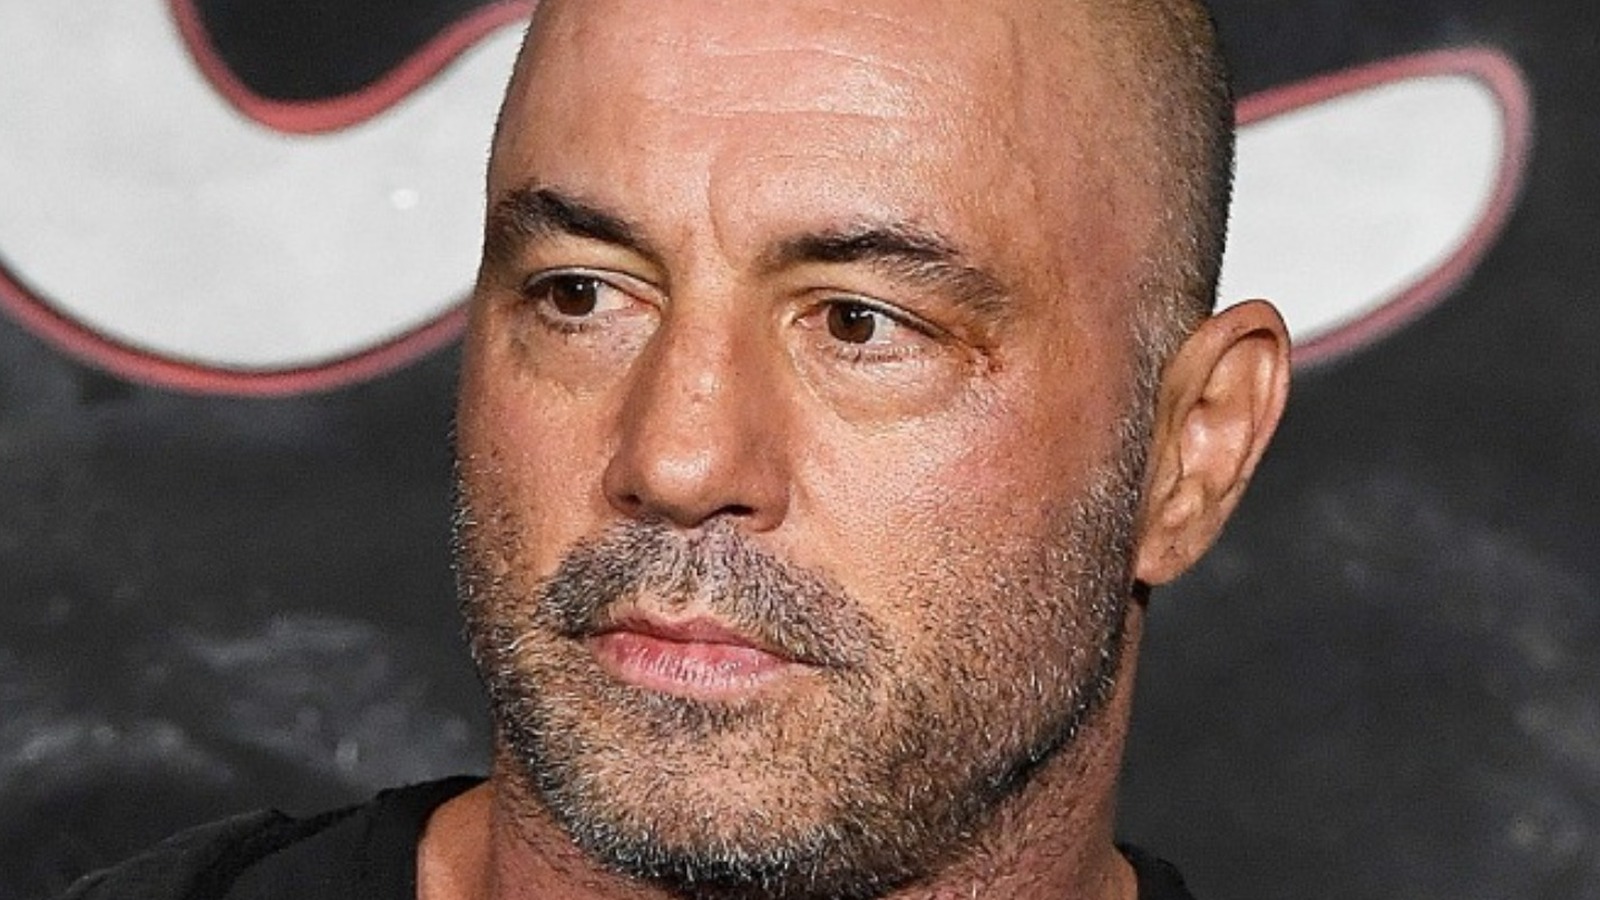 Surprising New Details Emerge About Spotify's Deal With Joe Rogan